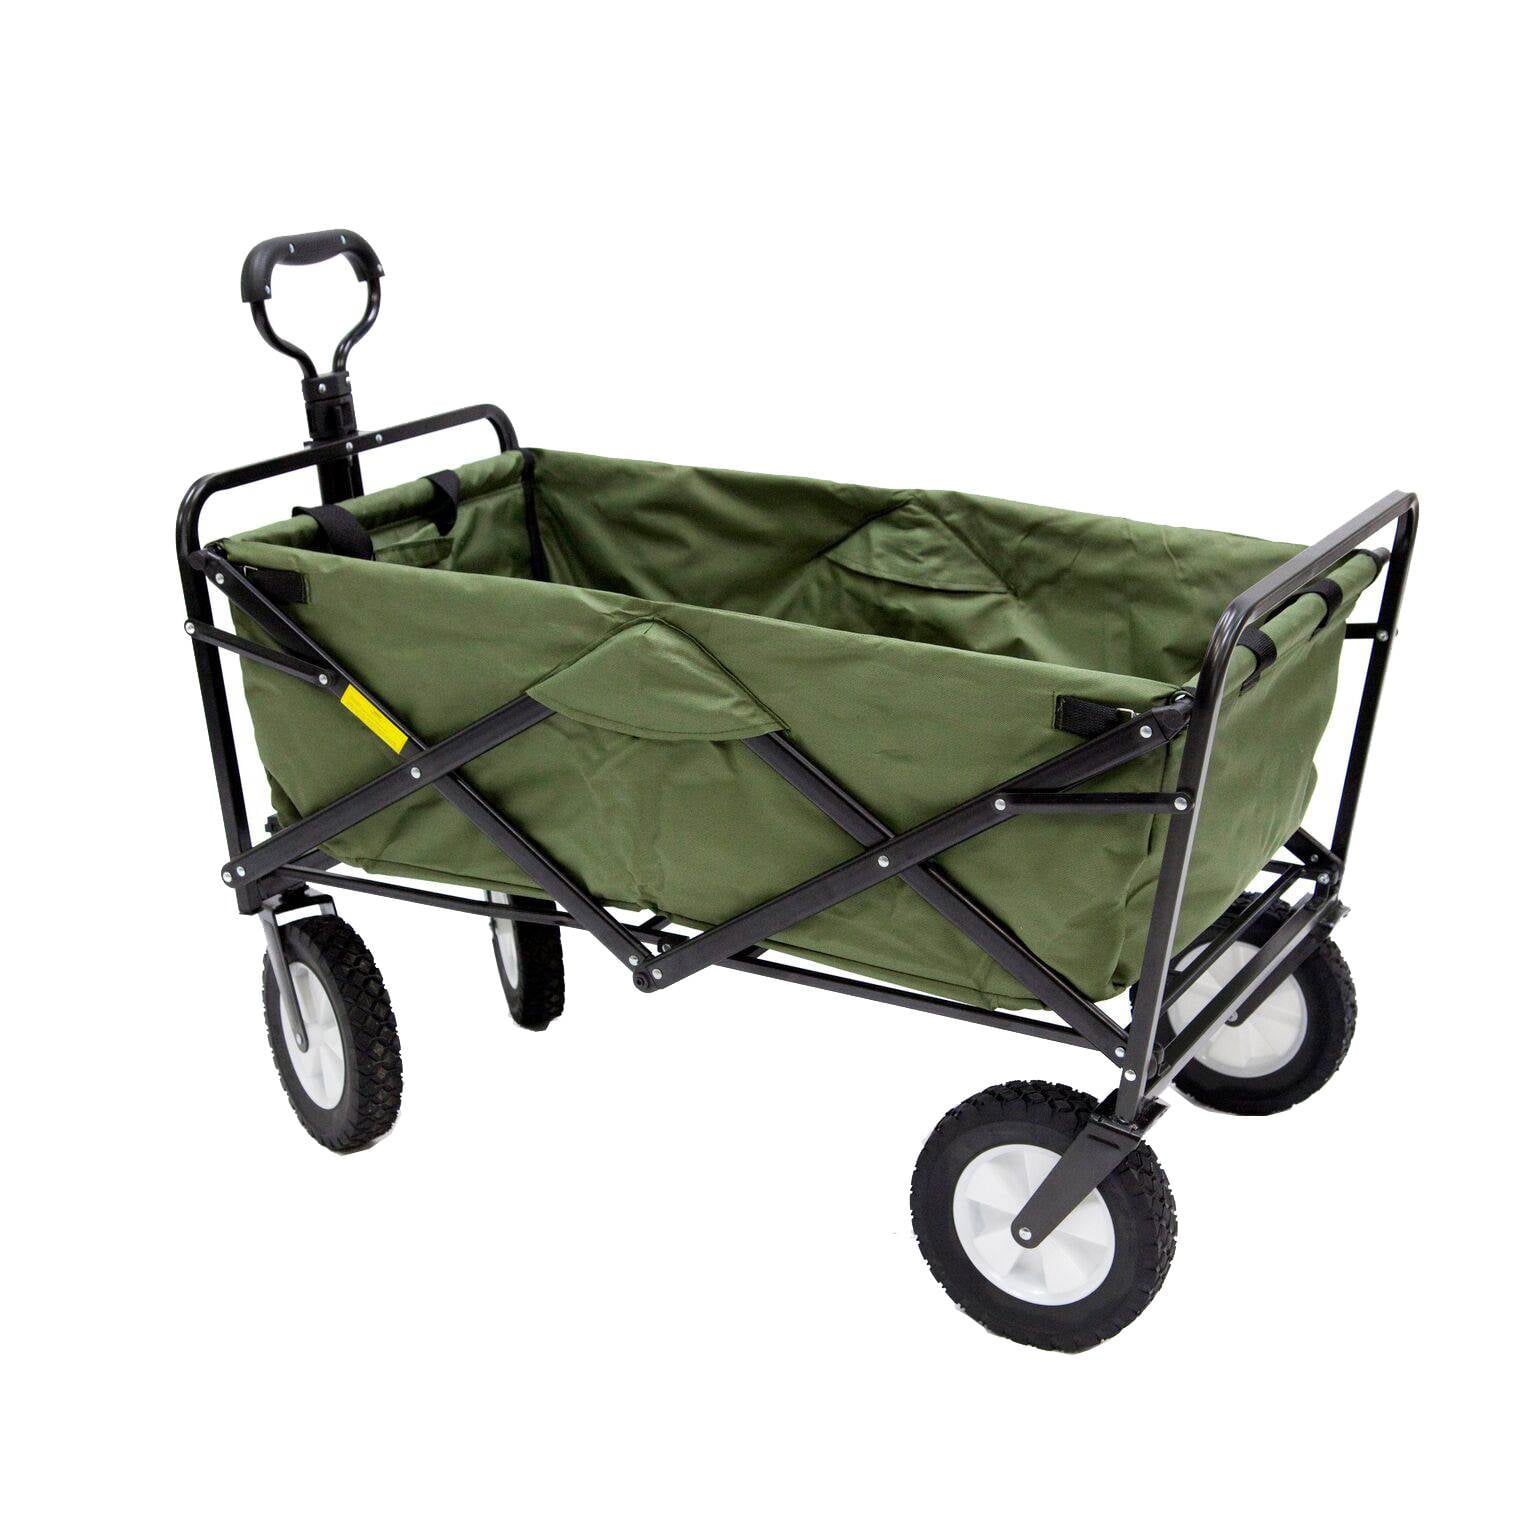 Certified Refurbished Black Mac Sports WTC-145 Collapsible Outdoor Folding Wagon 